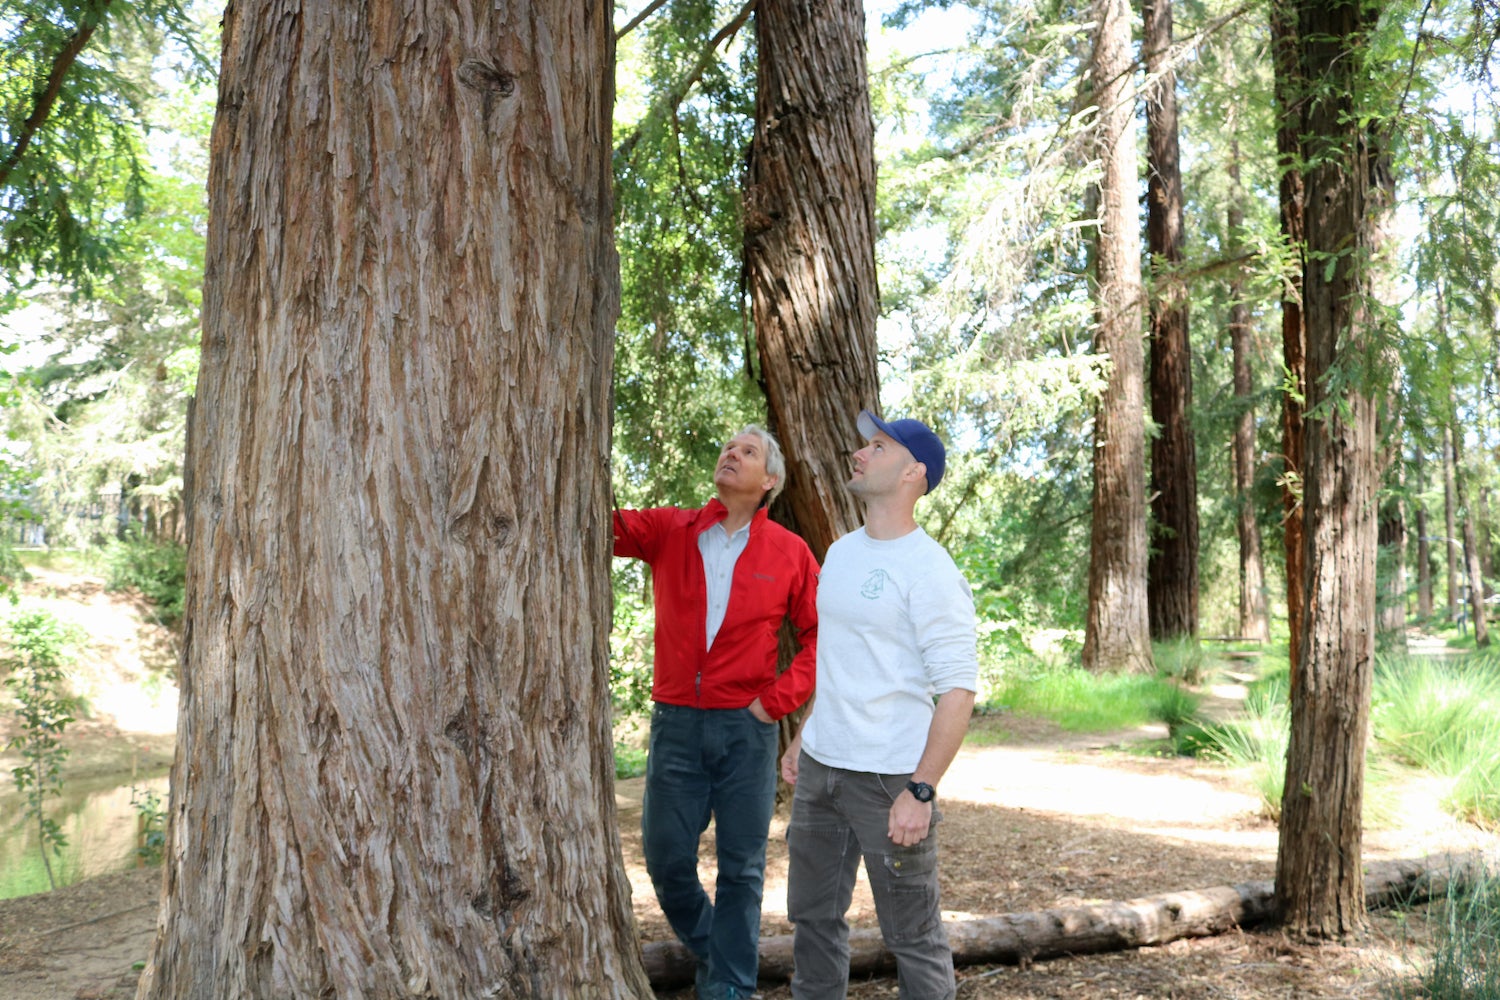 Two men, one in jacket and other in white shirt, stare up at redwood tree